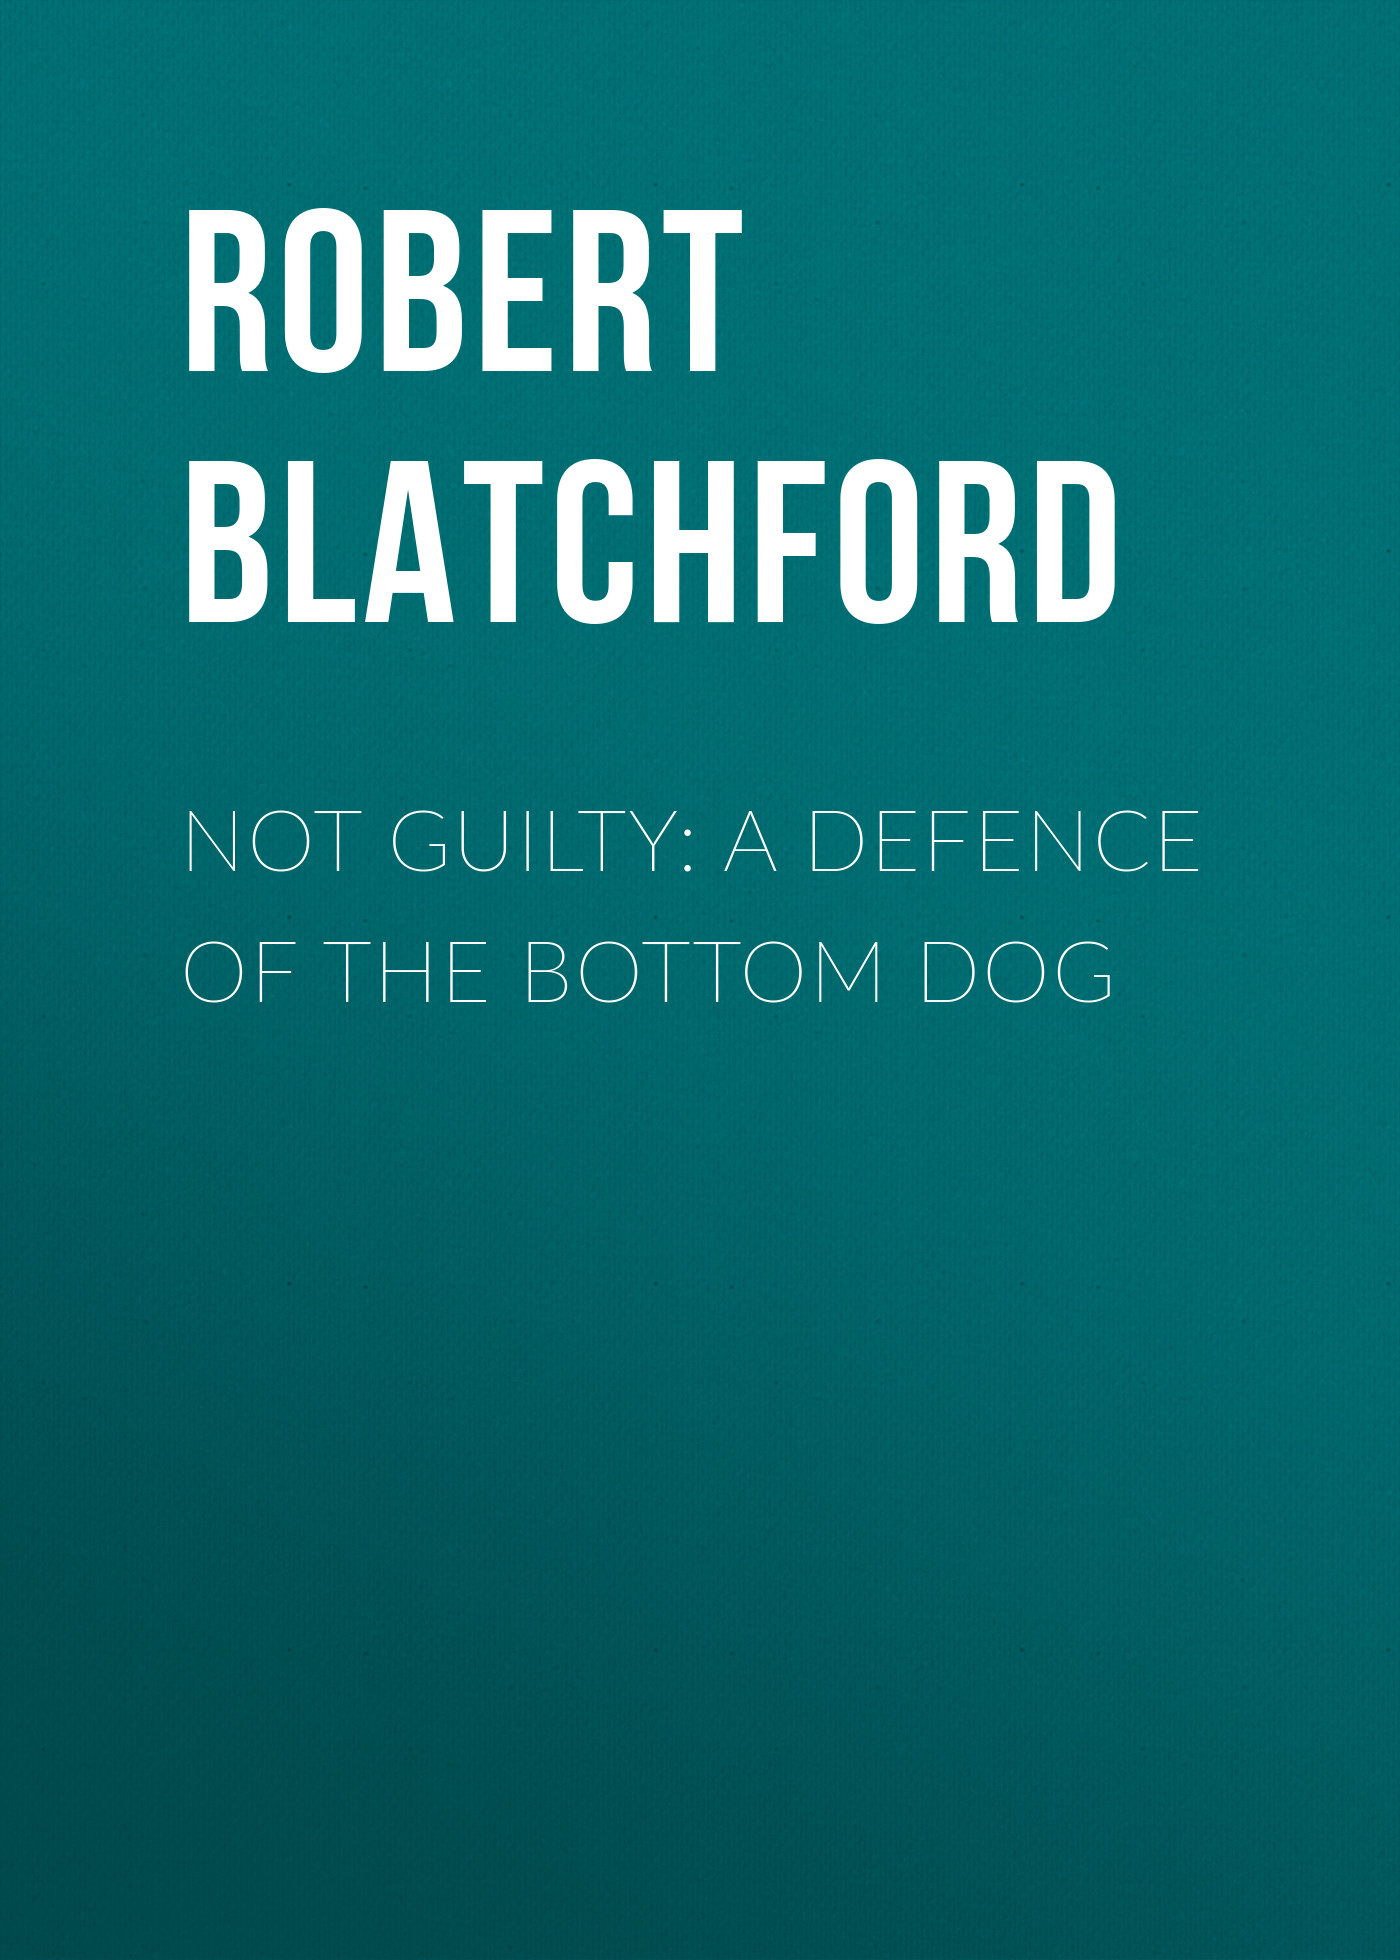 Not Guilty: A Defence of the Bottom Dog